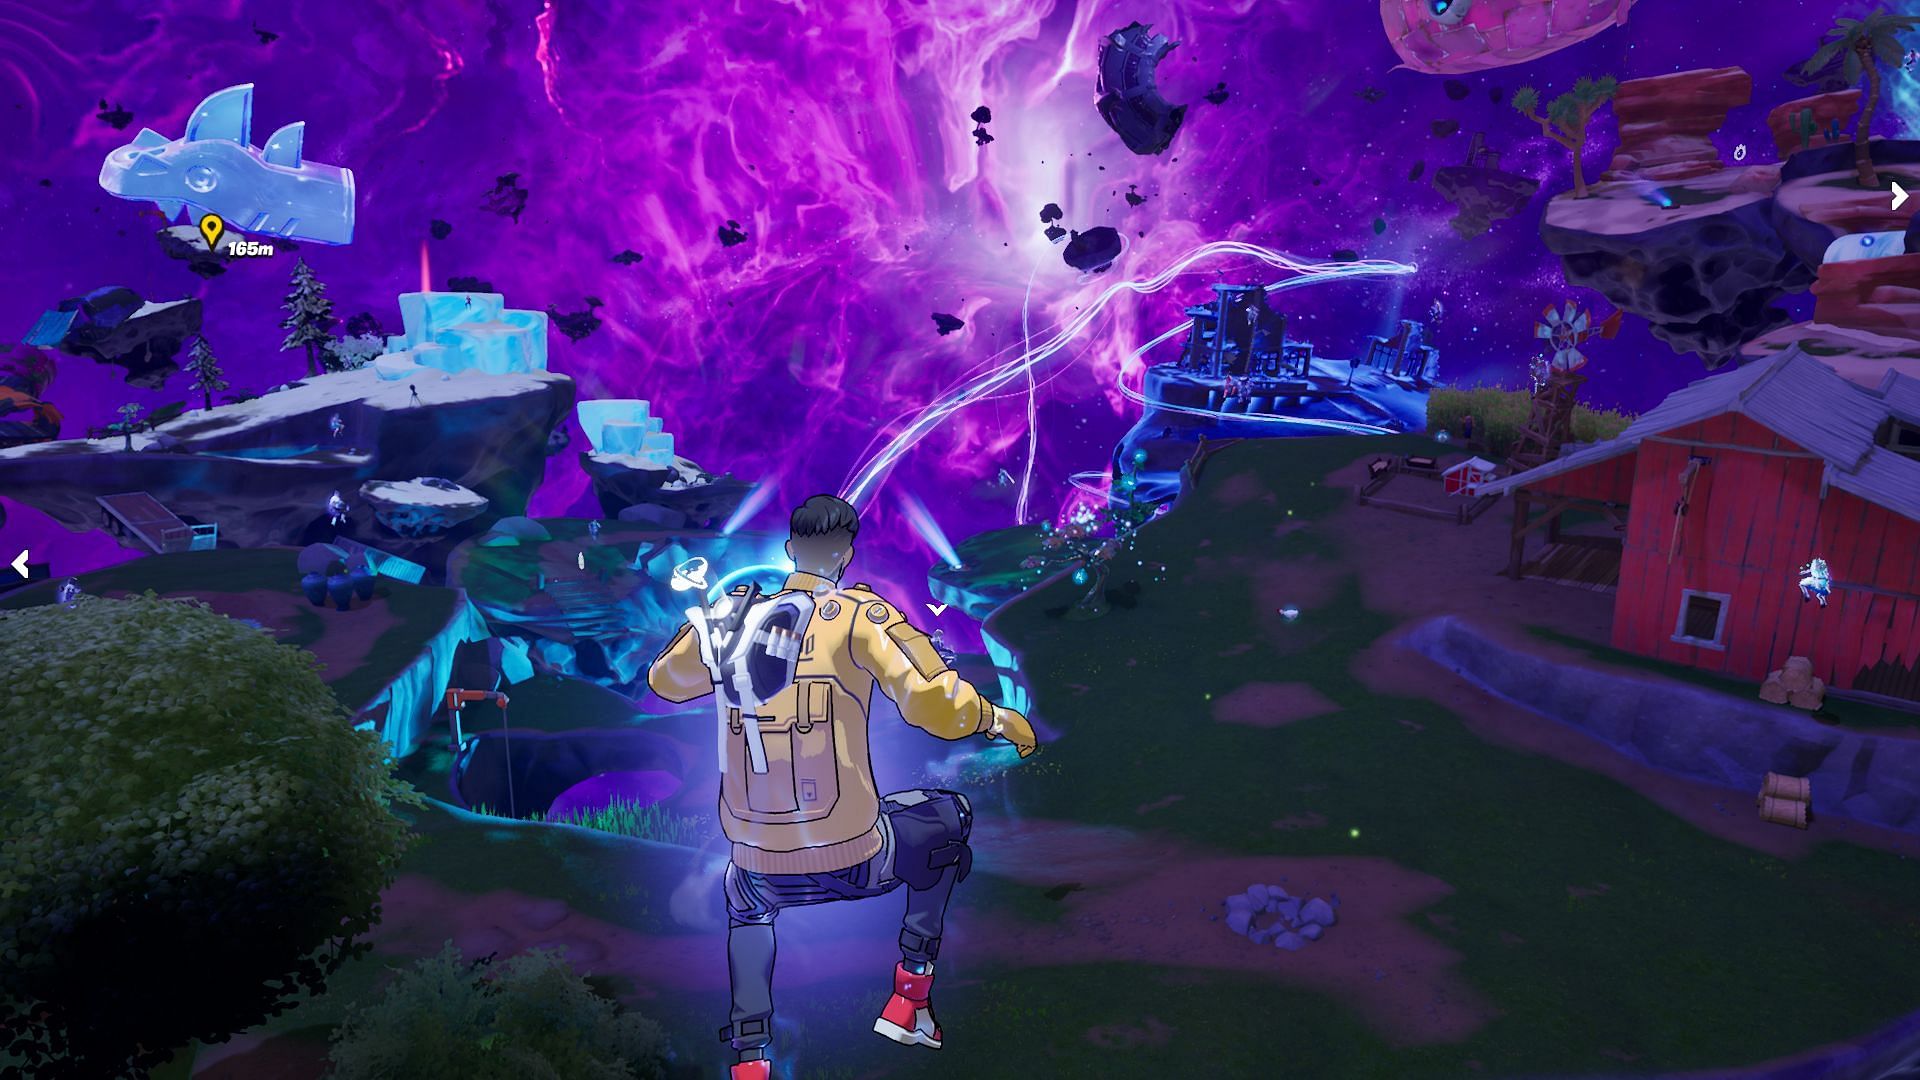 Fortnite Big Bang live event map twice the size of OG map, leakers claim